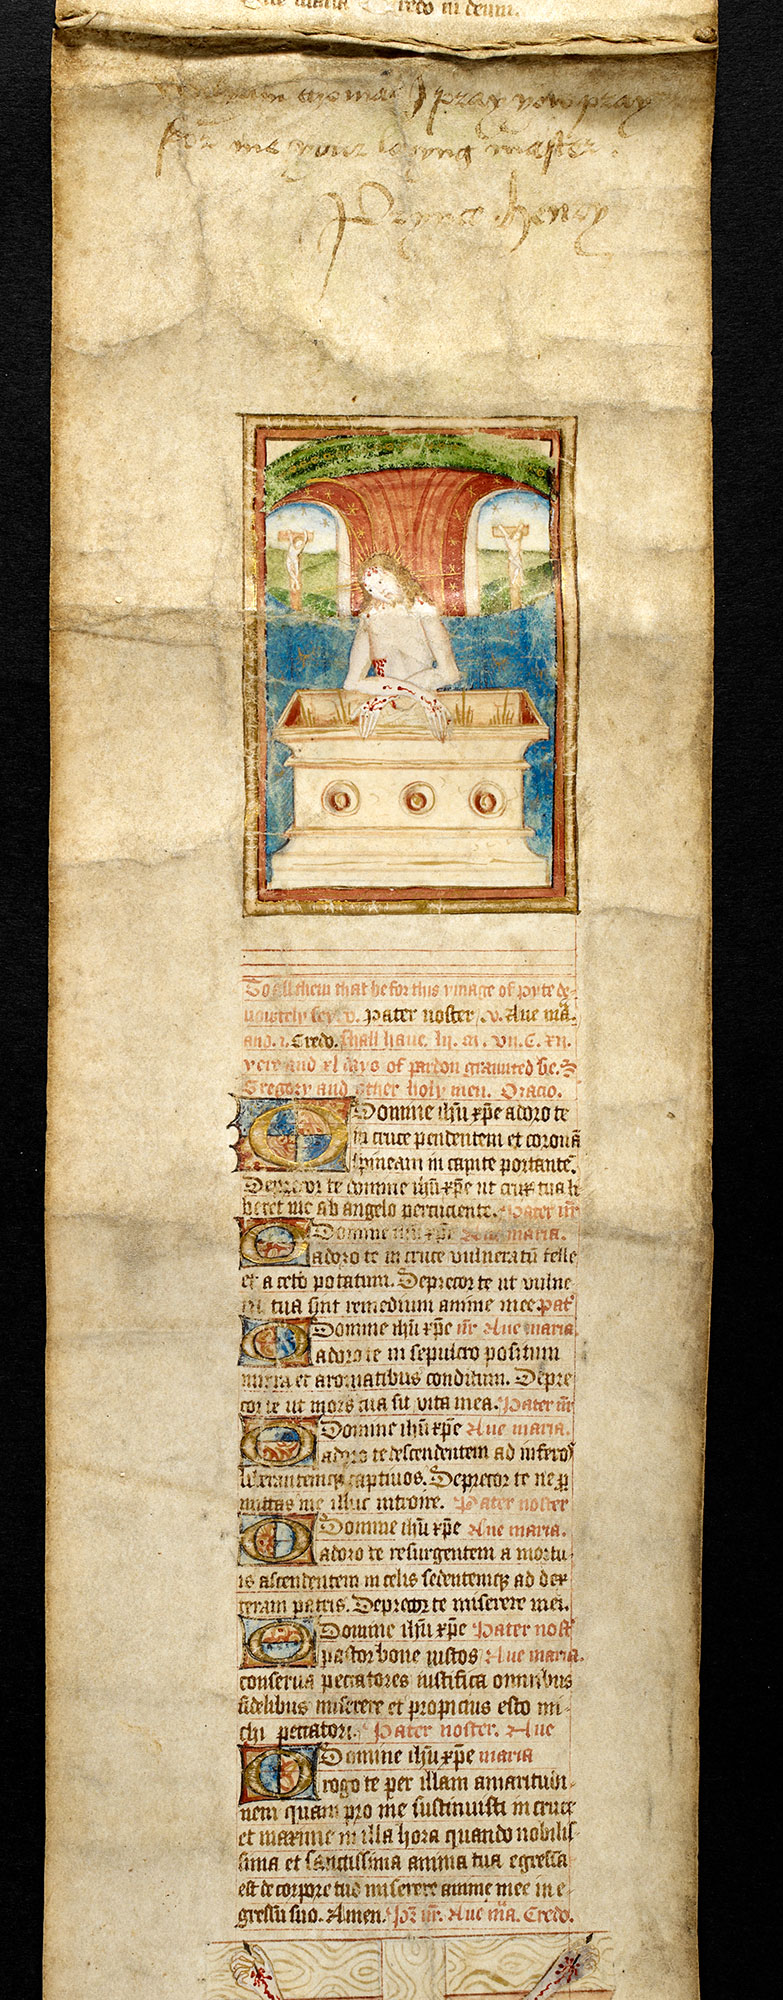 Prayer-roll of Henry VIII, c. 1485–1509, parchment roll, 335.5 x 12 cm (The British Library)